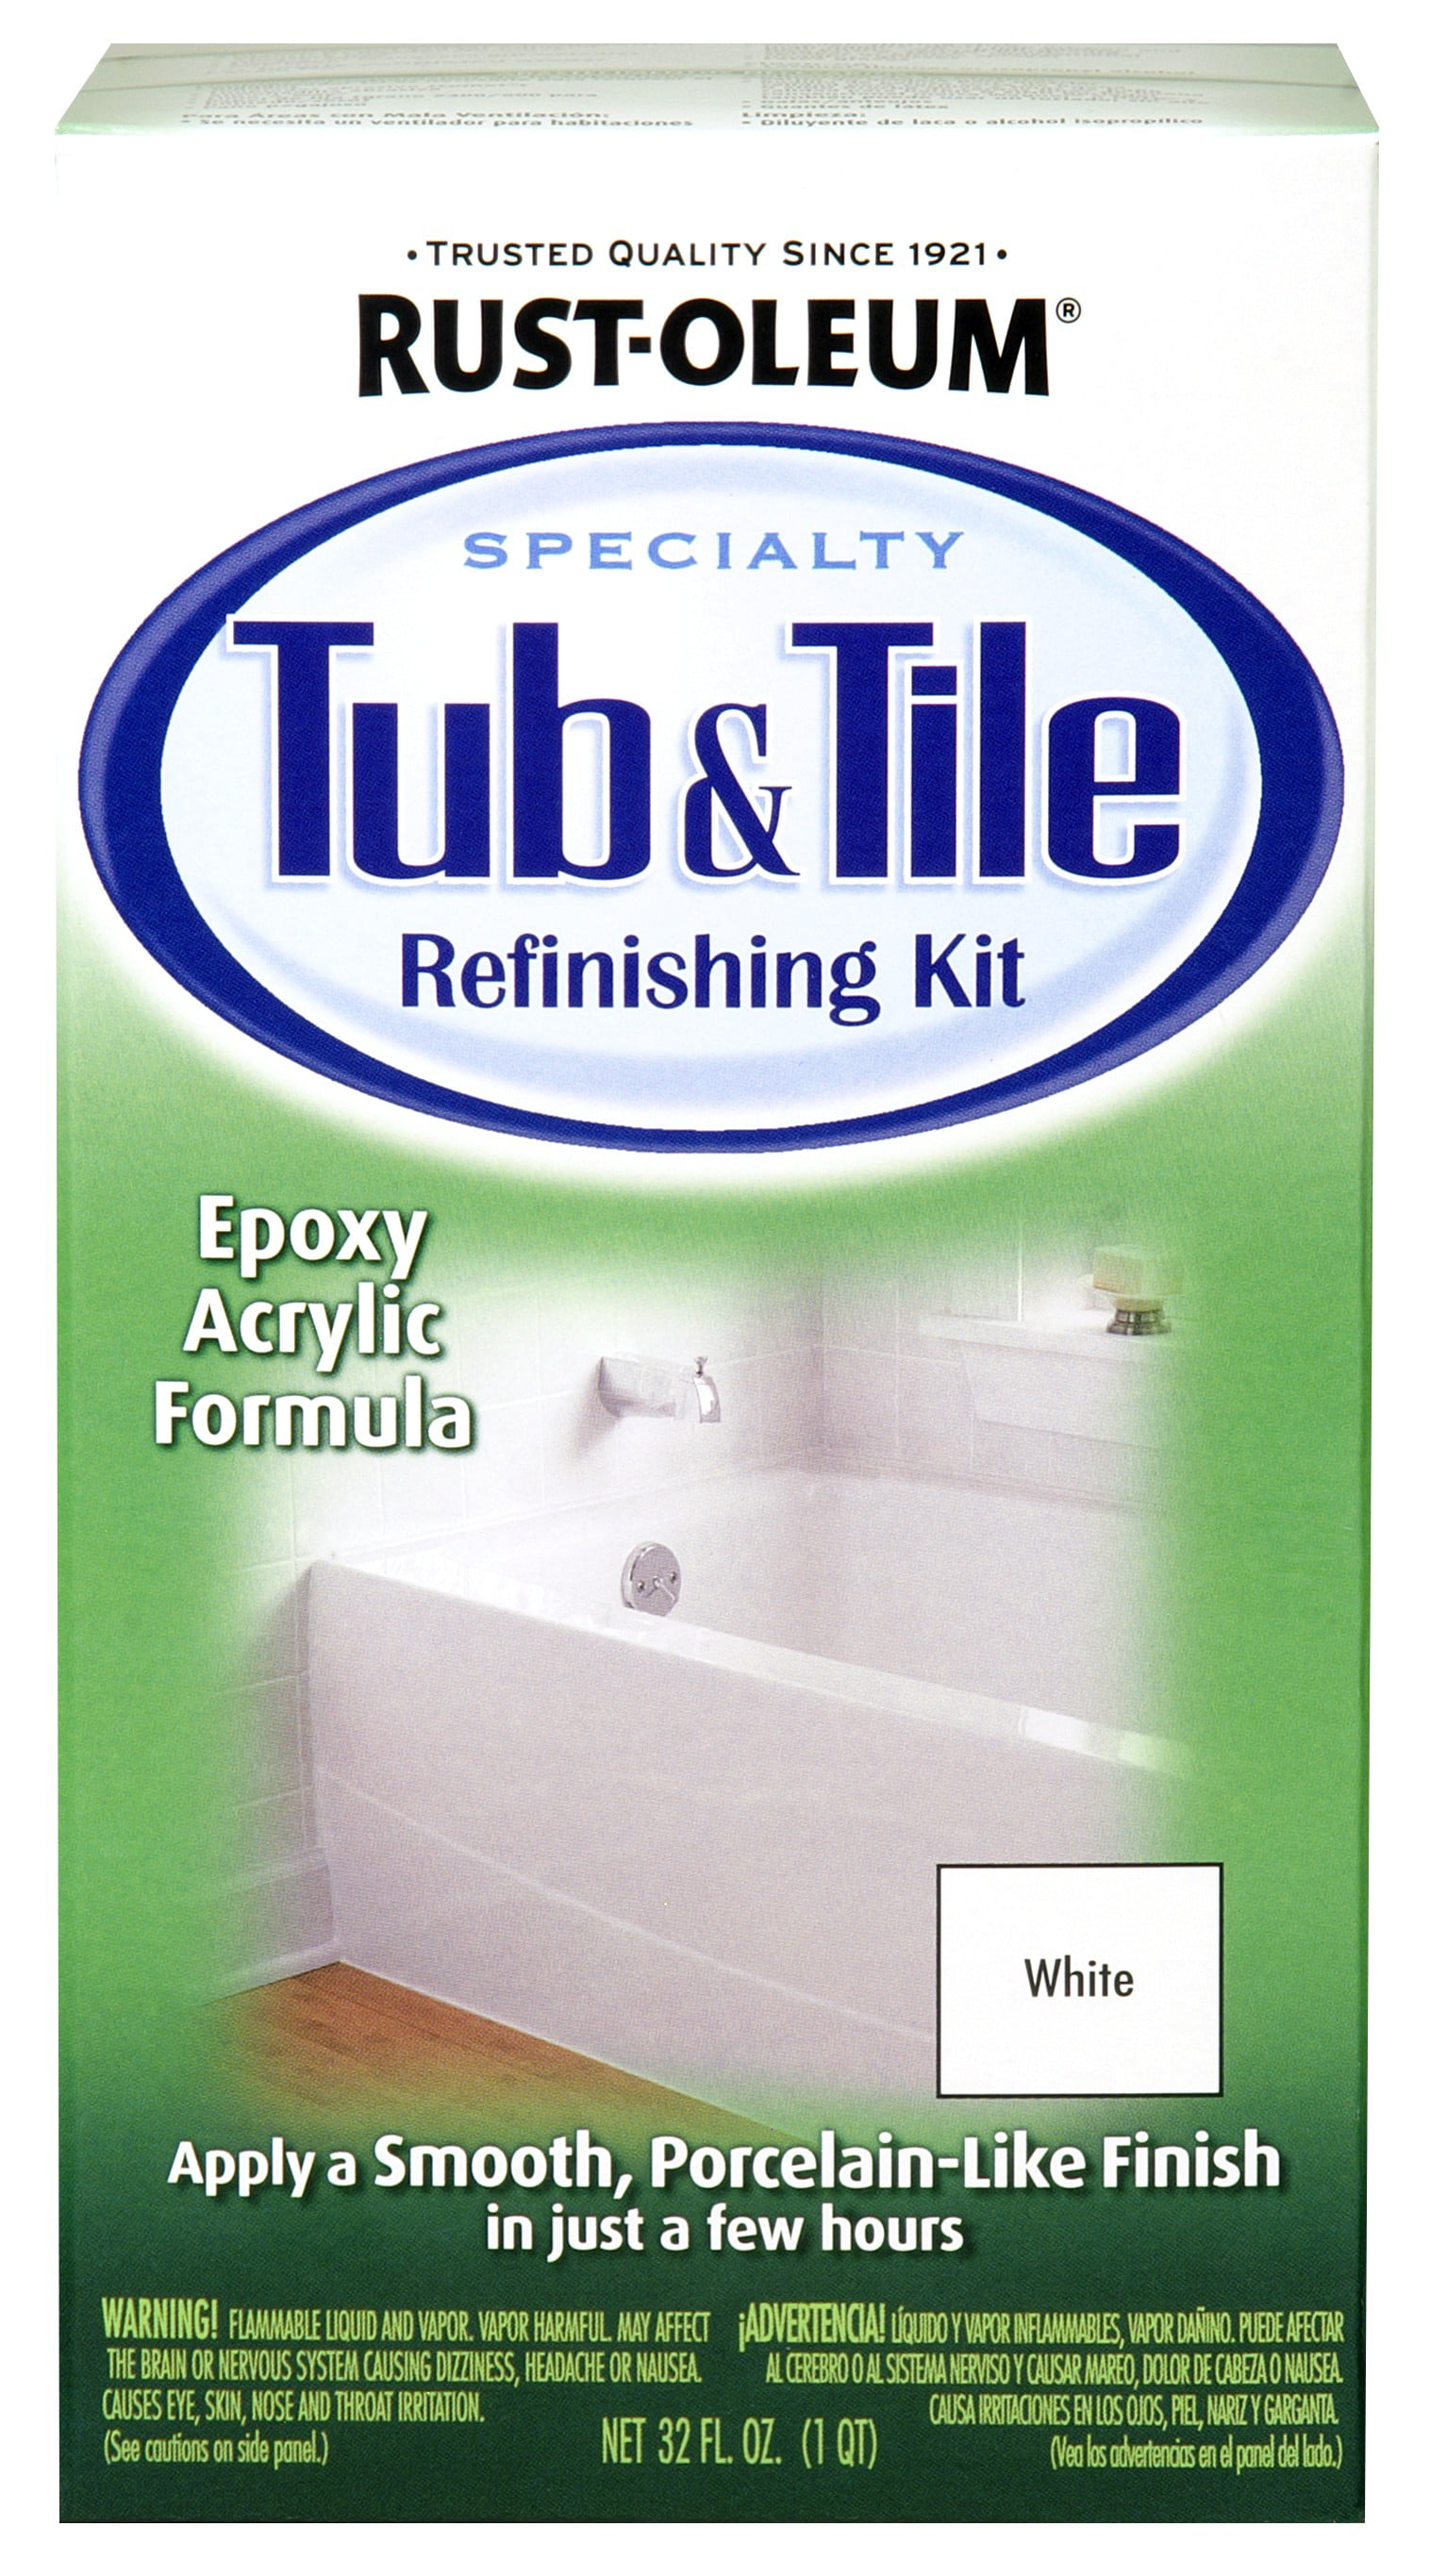 White Rust Oleum Specialty Tub Tile, How To Refinish A Bathtub With Rustoleum Tub And Tile Kit